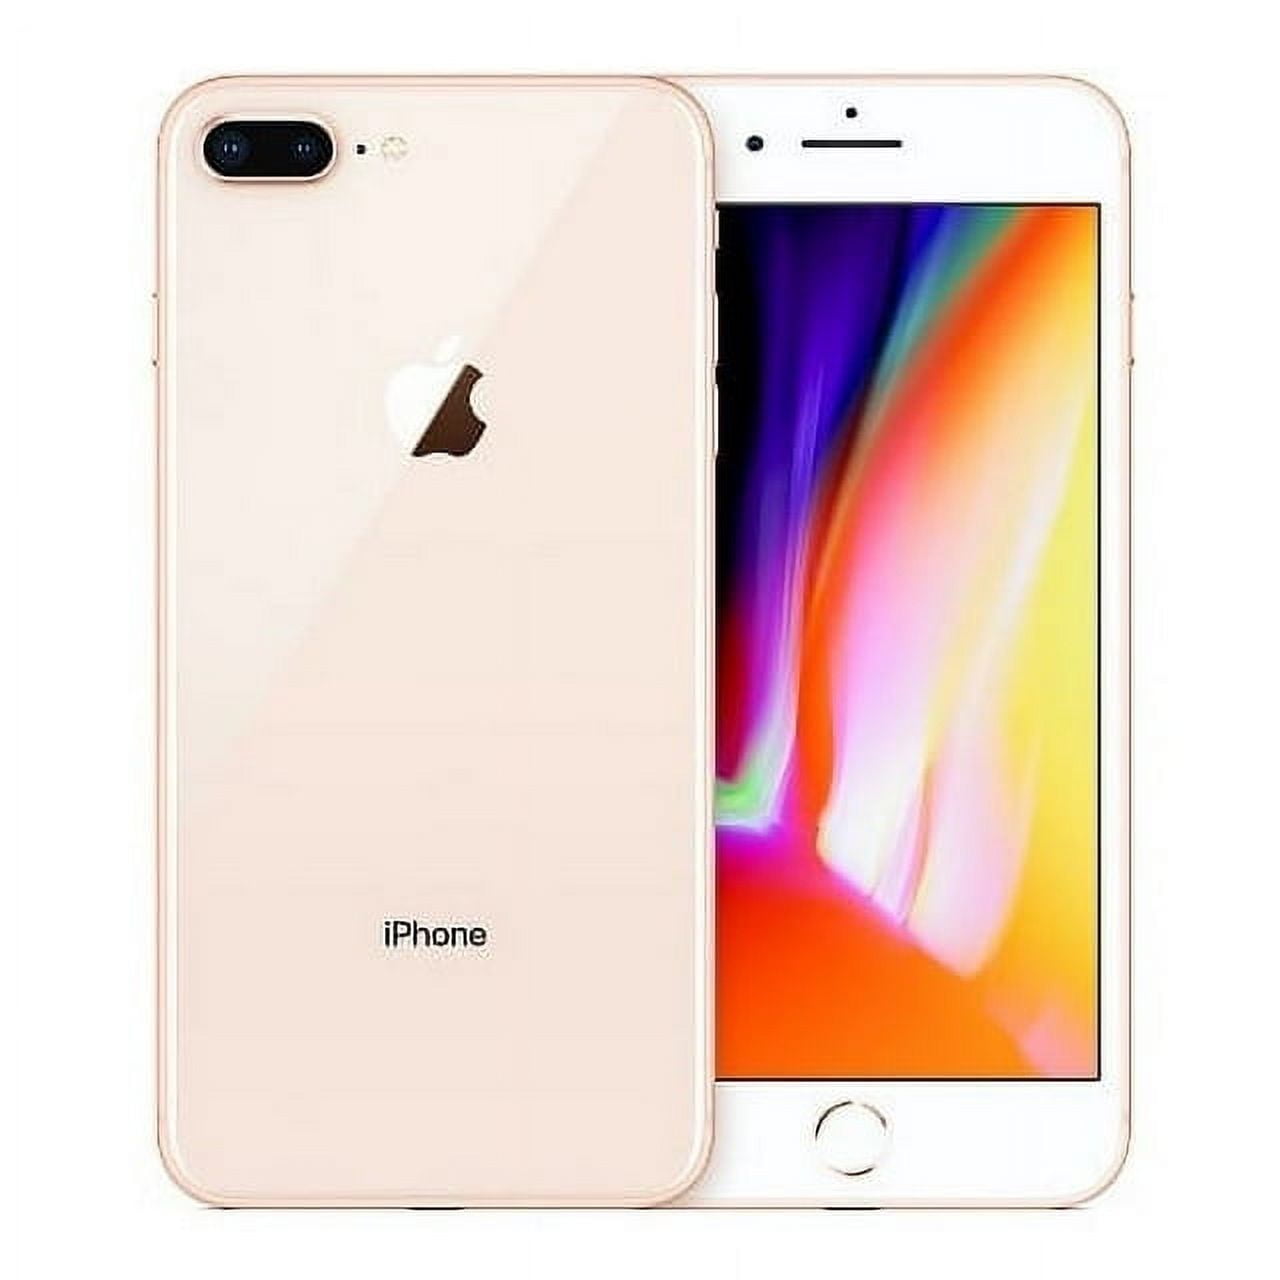 Pre-Owned Apple iPhone 8 - Carrier Unlocked - 256 GB Gold (Fair)